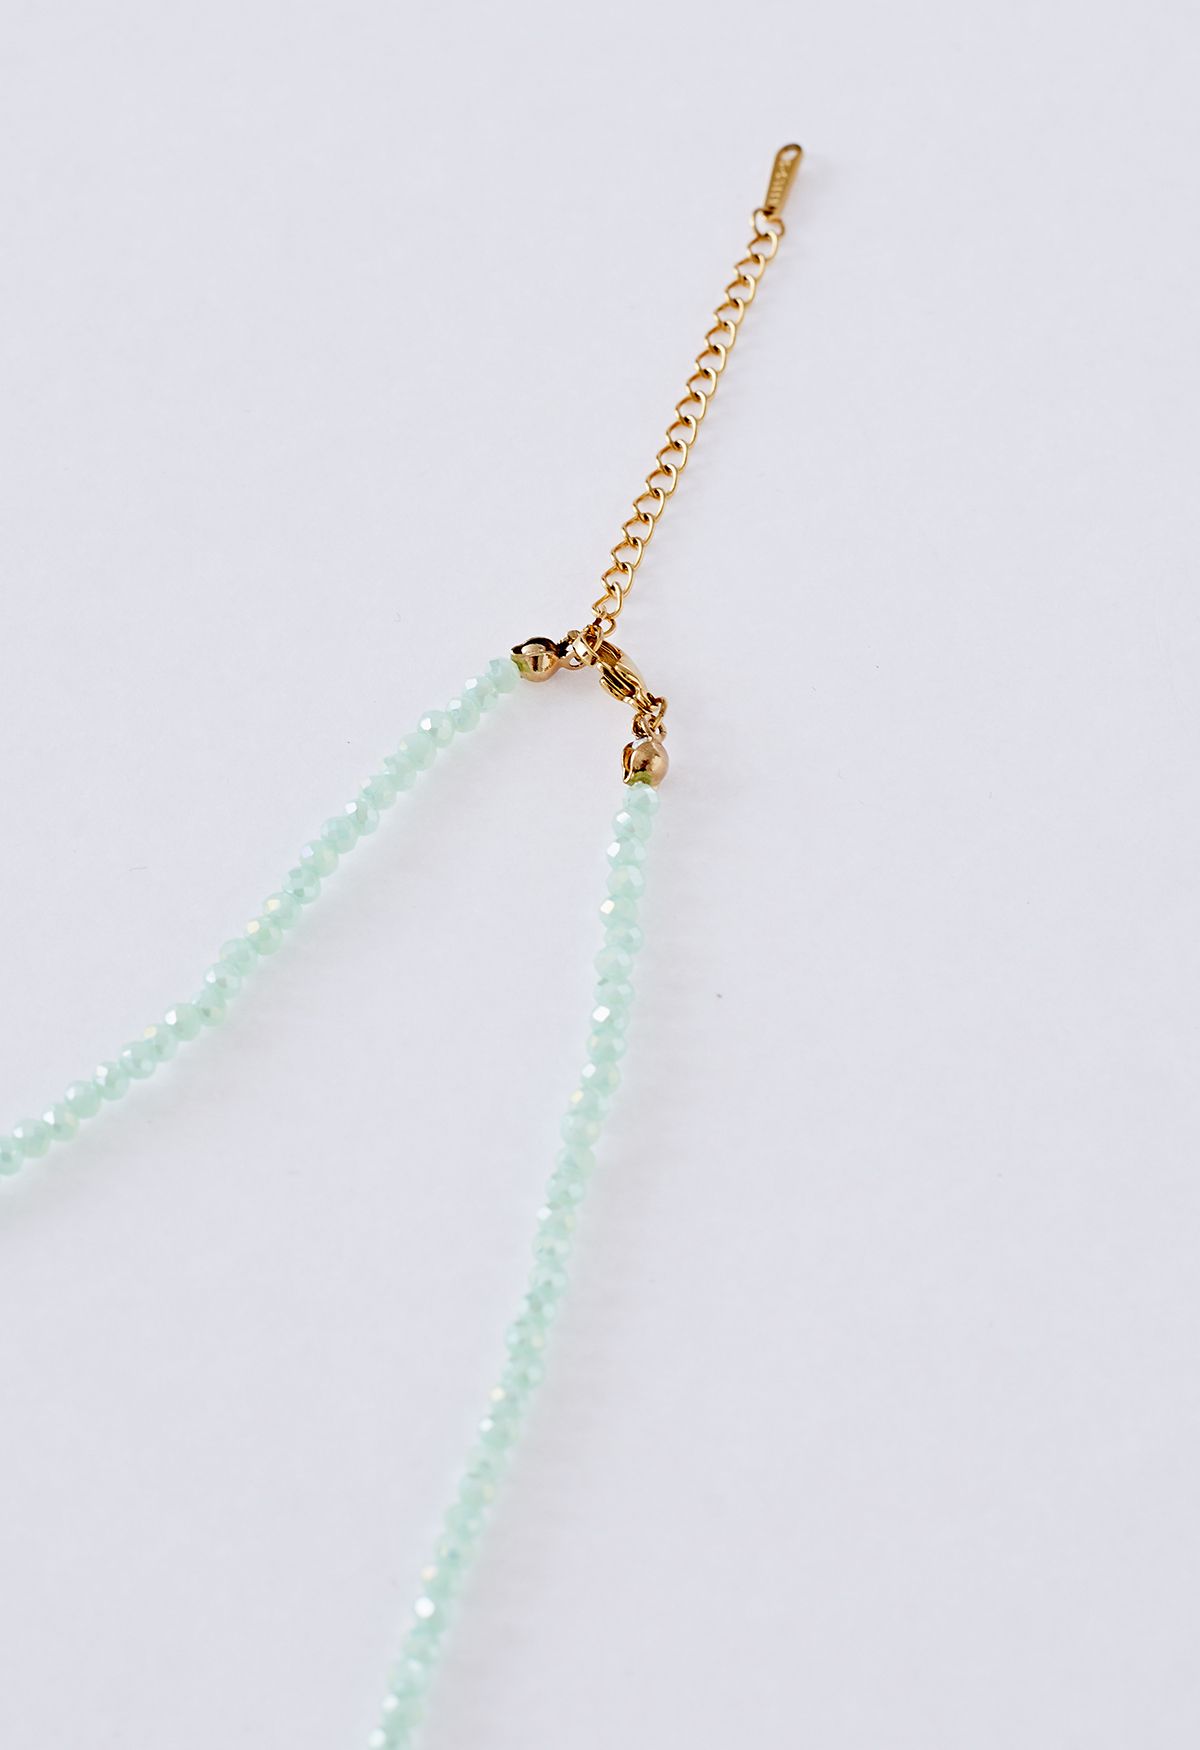 Pastel Crystal Spliced Pearl Necklace